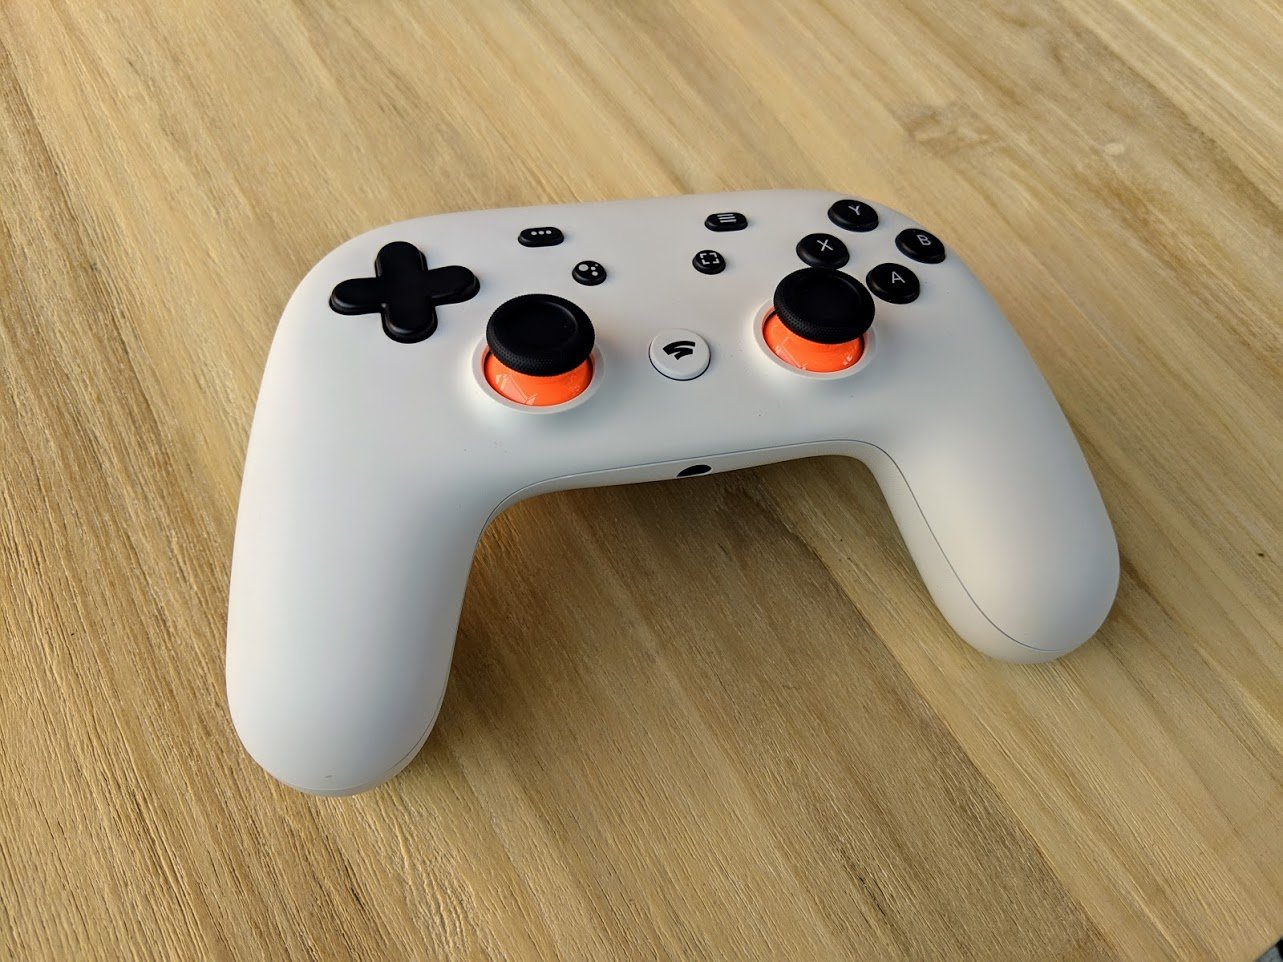 You can now purchase Google's Stadia controller for $69